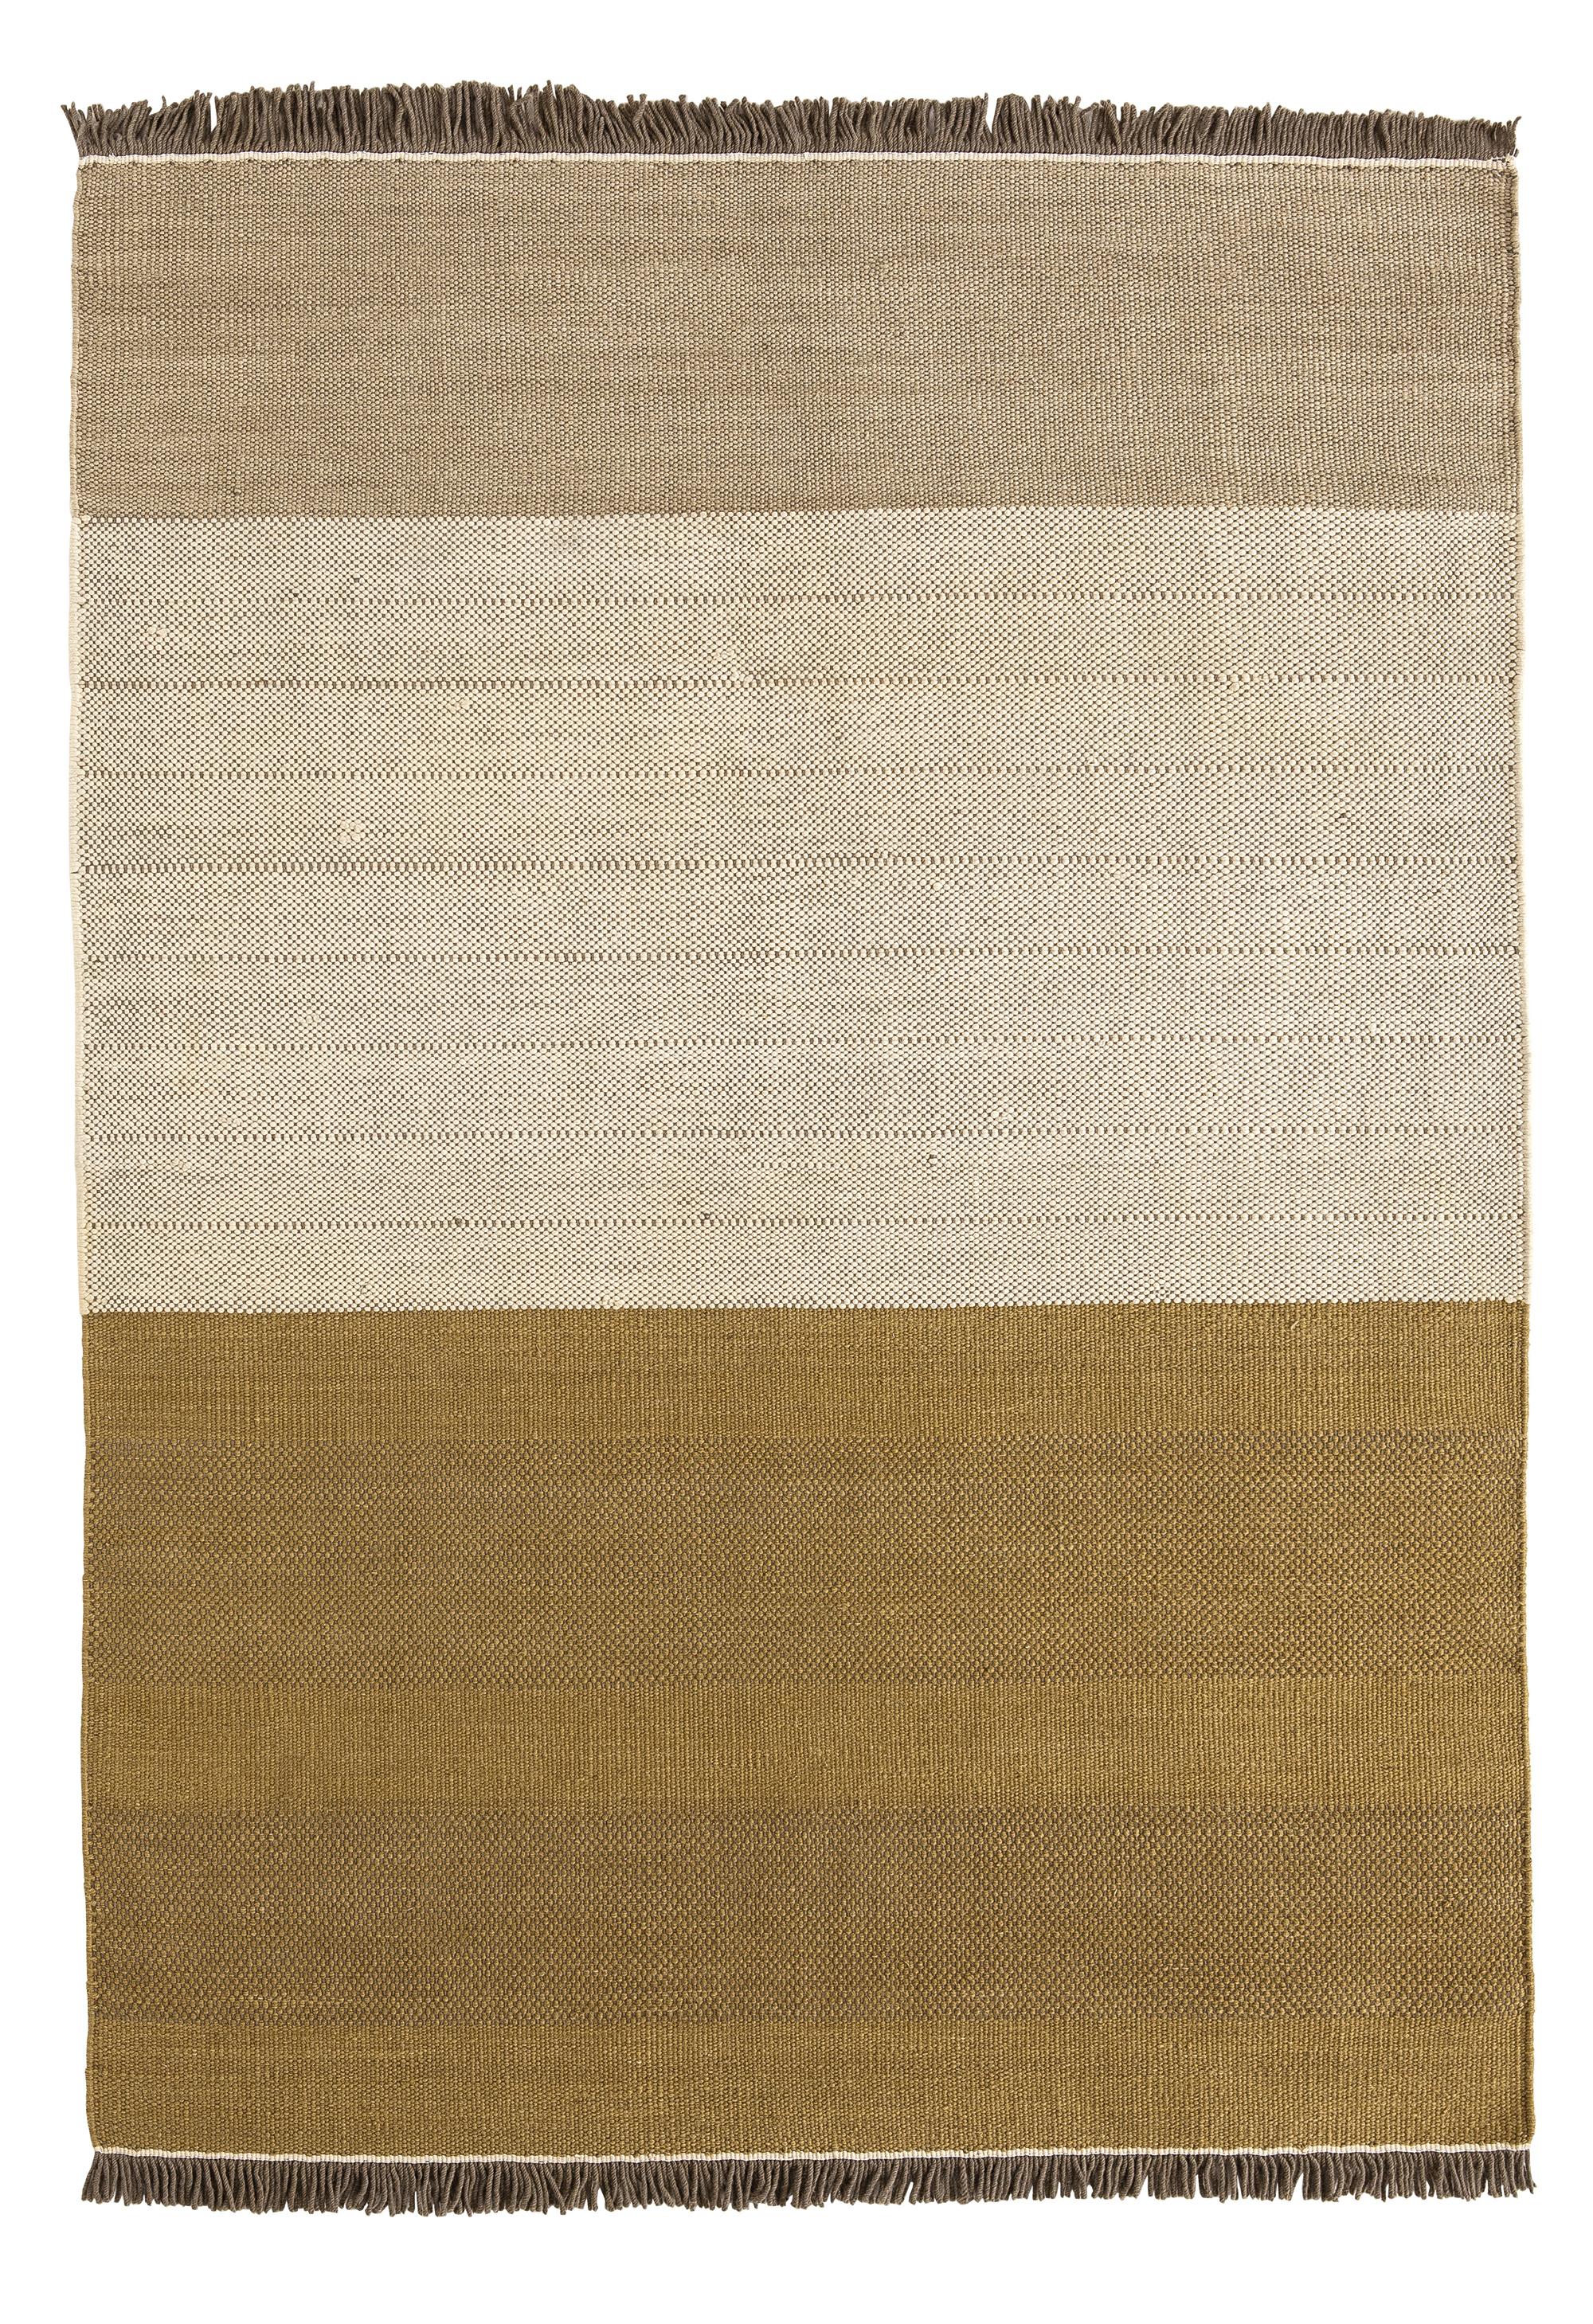 'Tres Stripes' Hand-Loomed Rug for Nanimarquina In New Condition For Sale In Glendale, CA